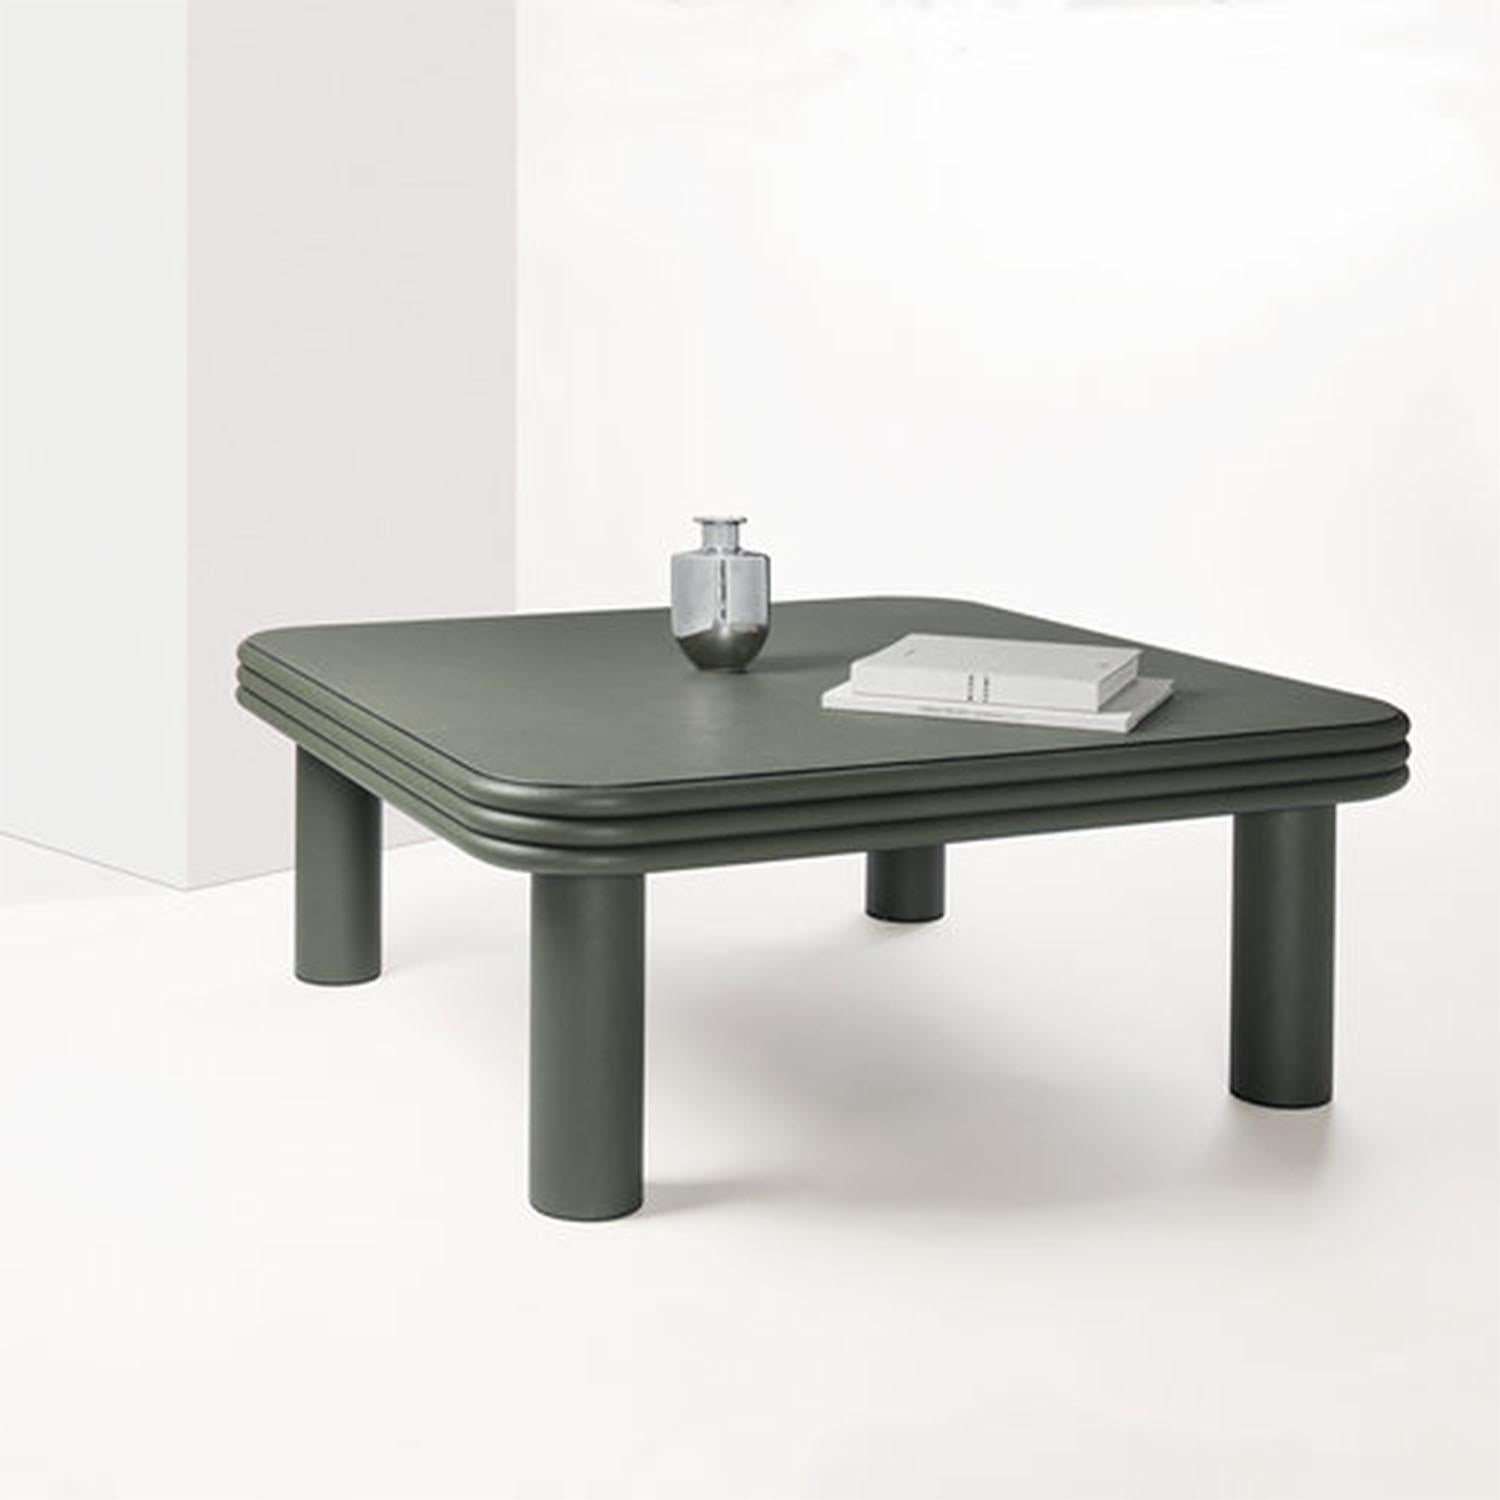 Contemporary leather square coffee table - Scala by Stephane Parmentier for Giobagnara.
The object presented in the image has following finish: F02 loden green nappa leather.

Supported by four thick cylinders and entirely covered in dark green